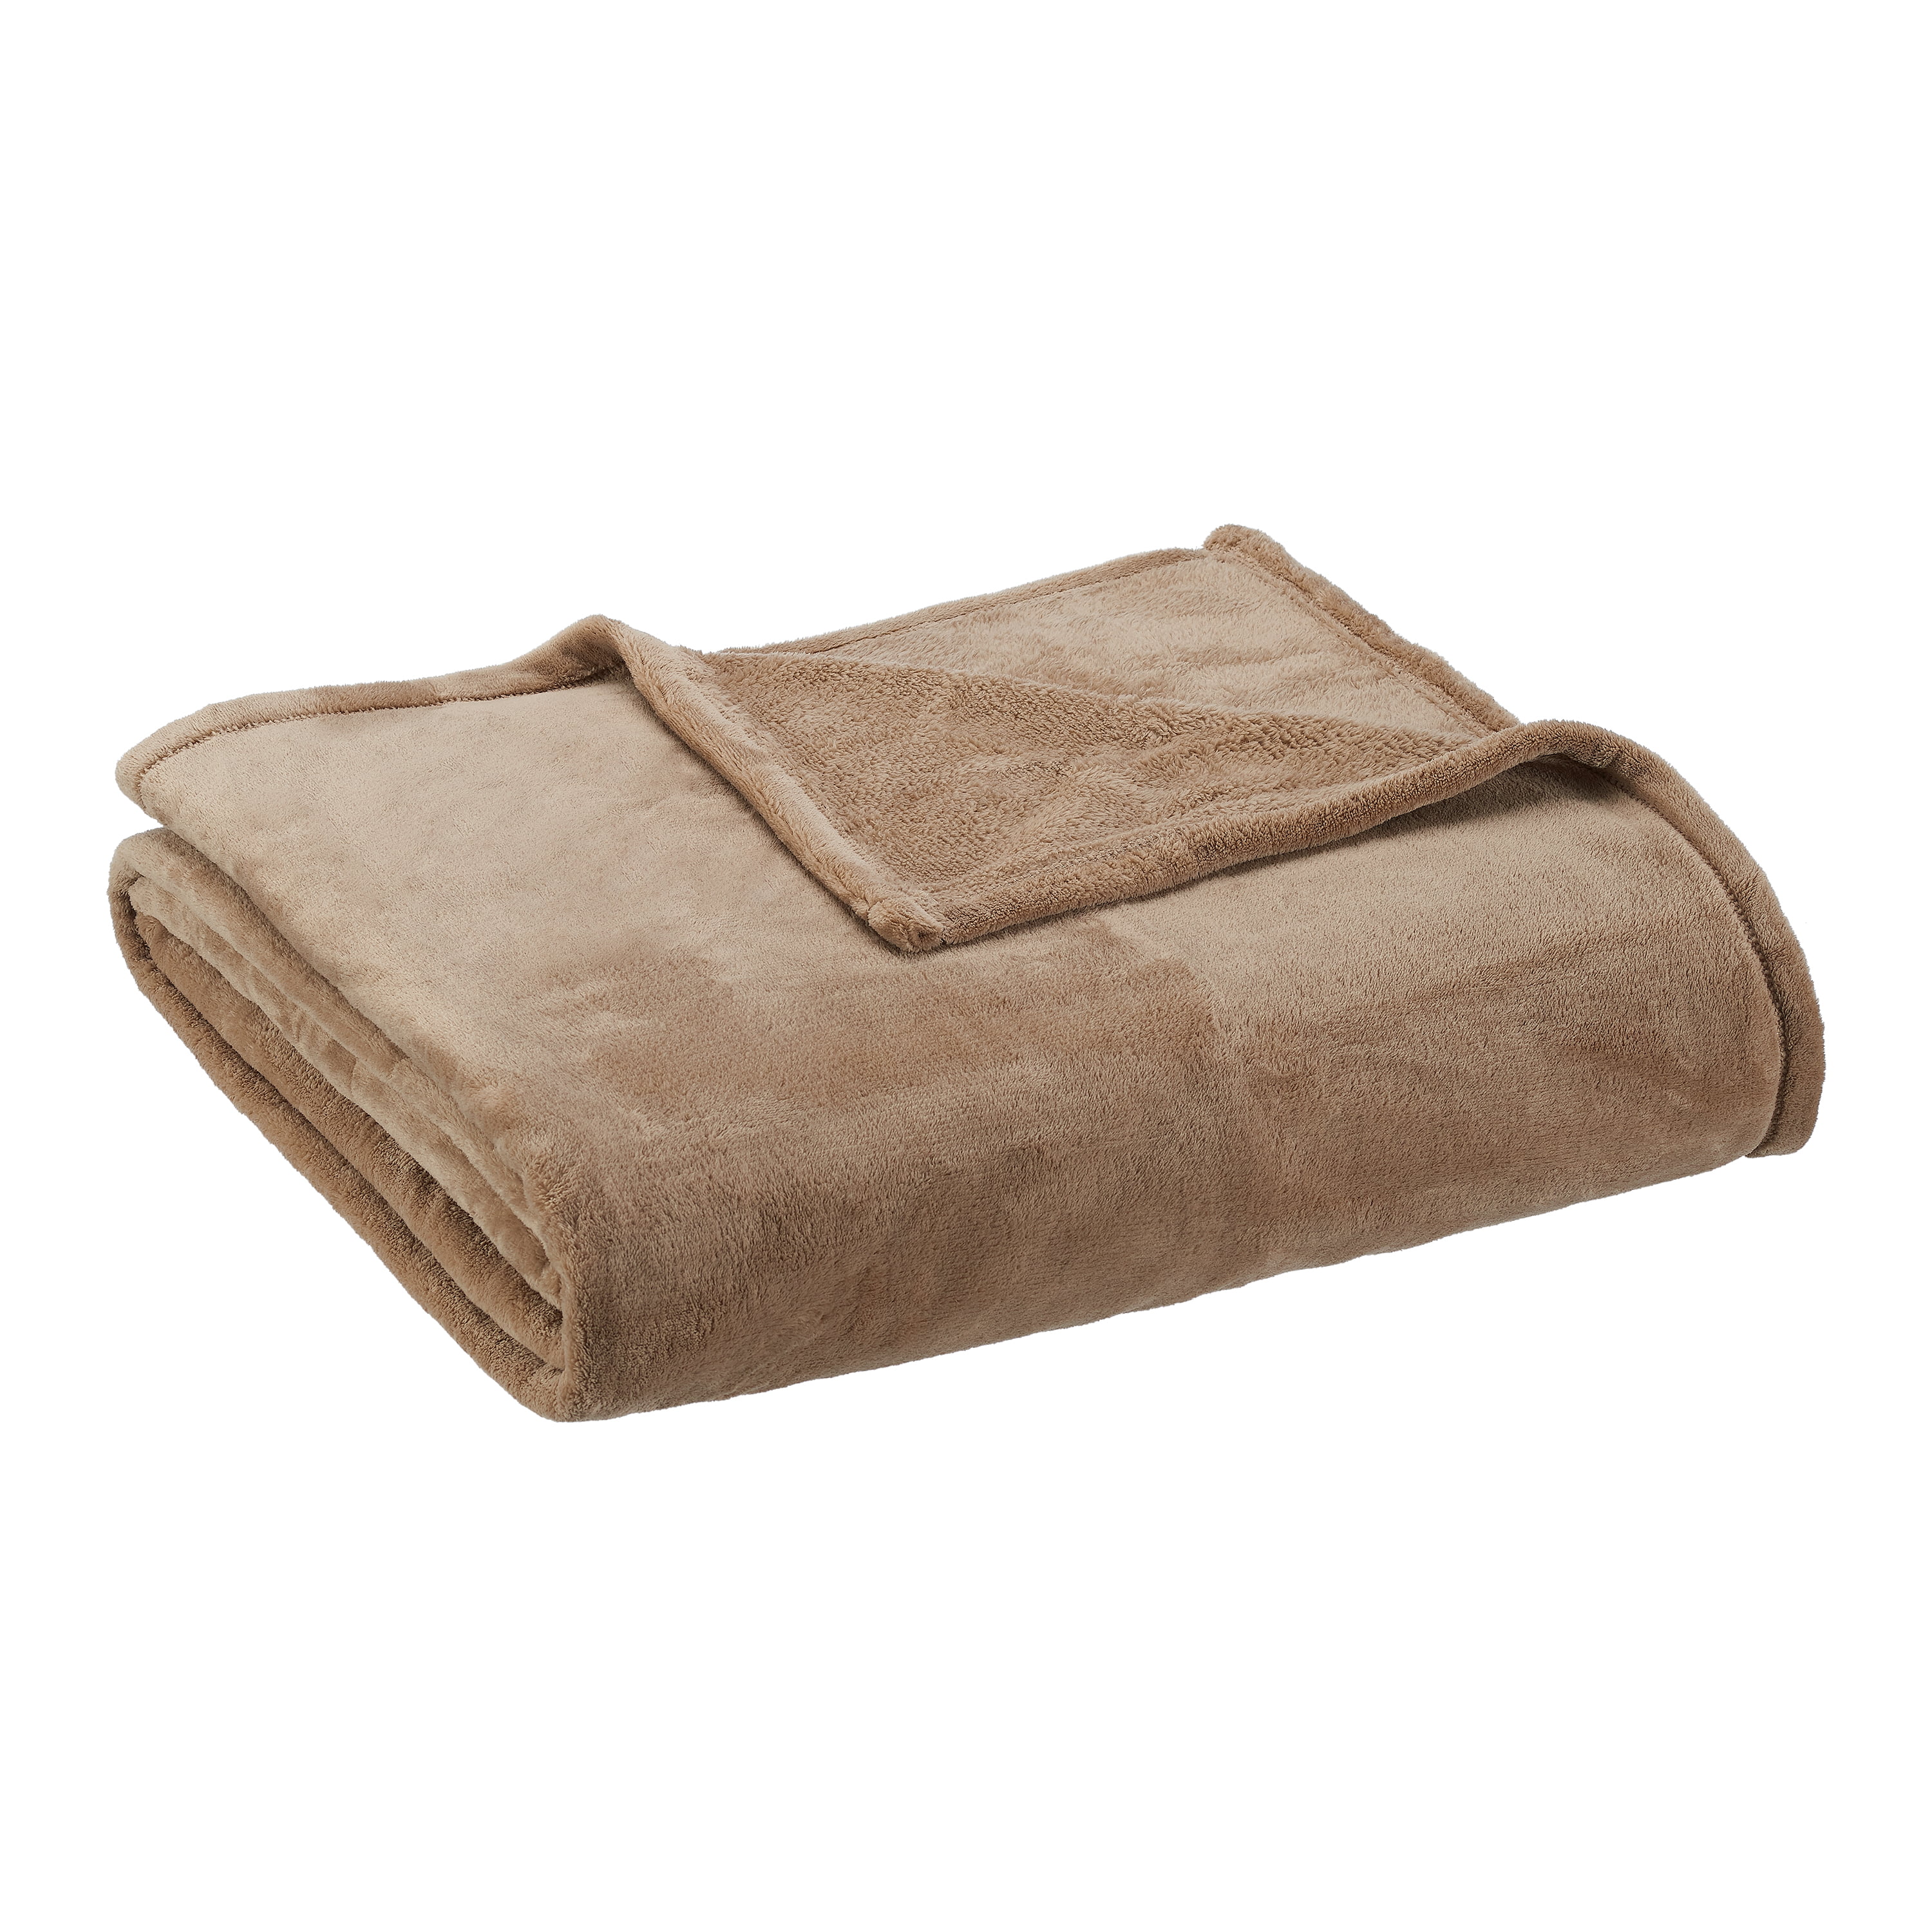 Mainstays Super Soft Plush Blanket, Brown, King 102"X90", Suitable for Adult